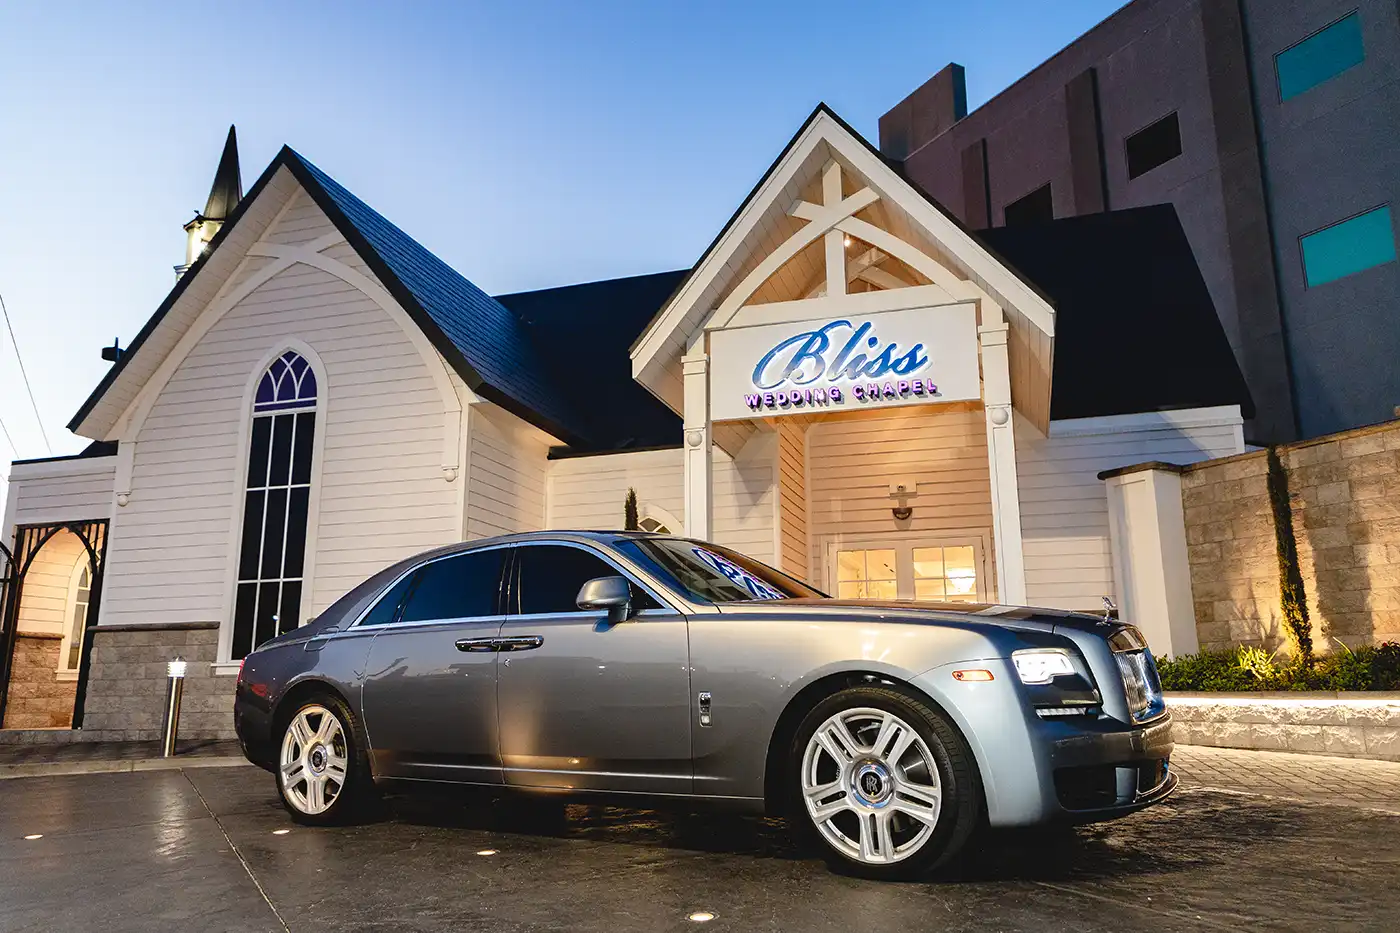 Bliss Wedding Chapel Front with Rolls Royce